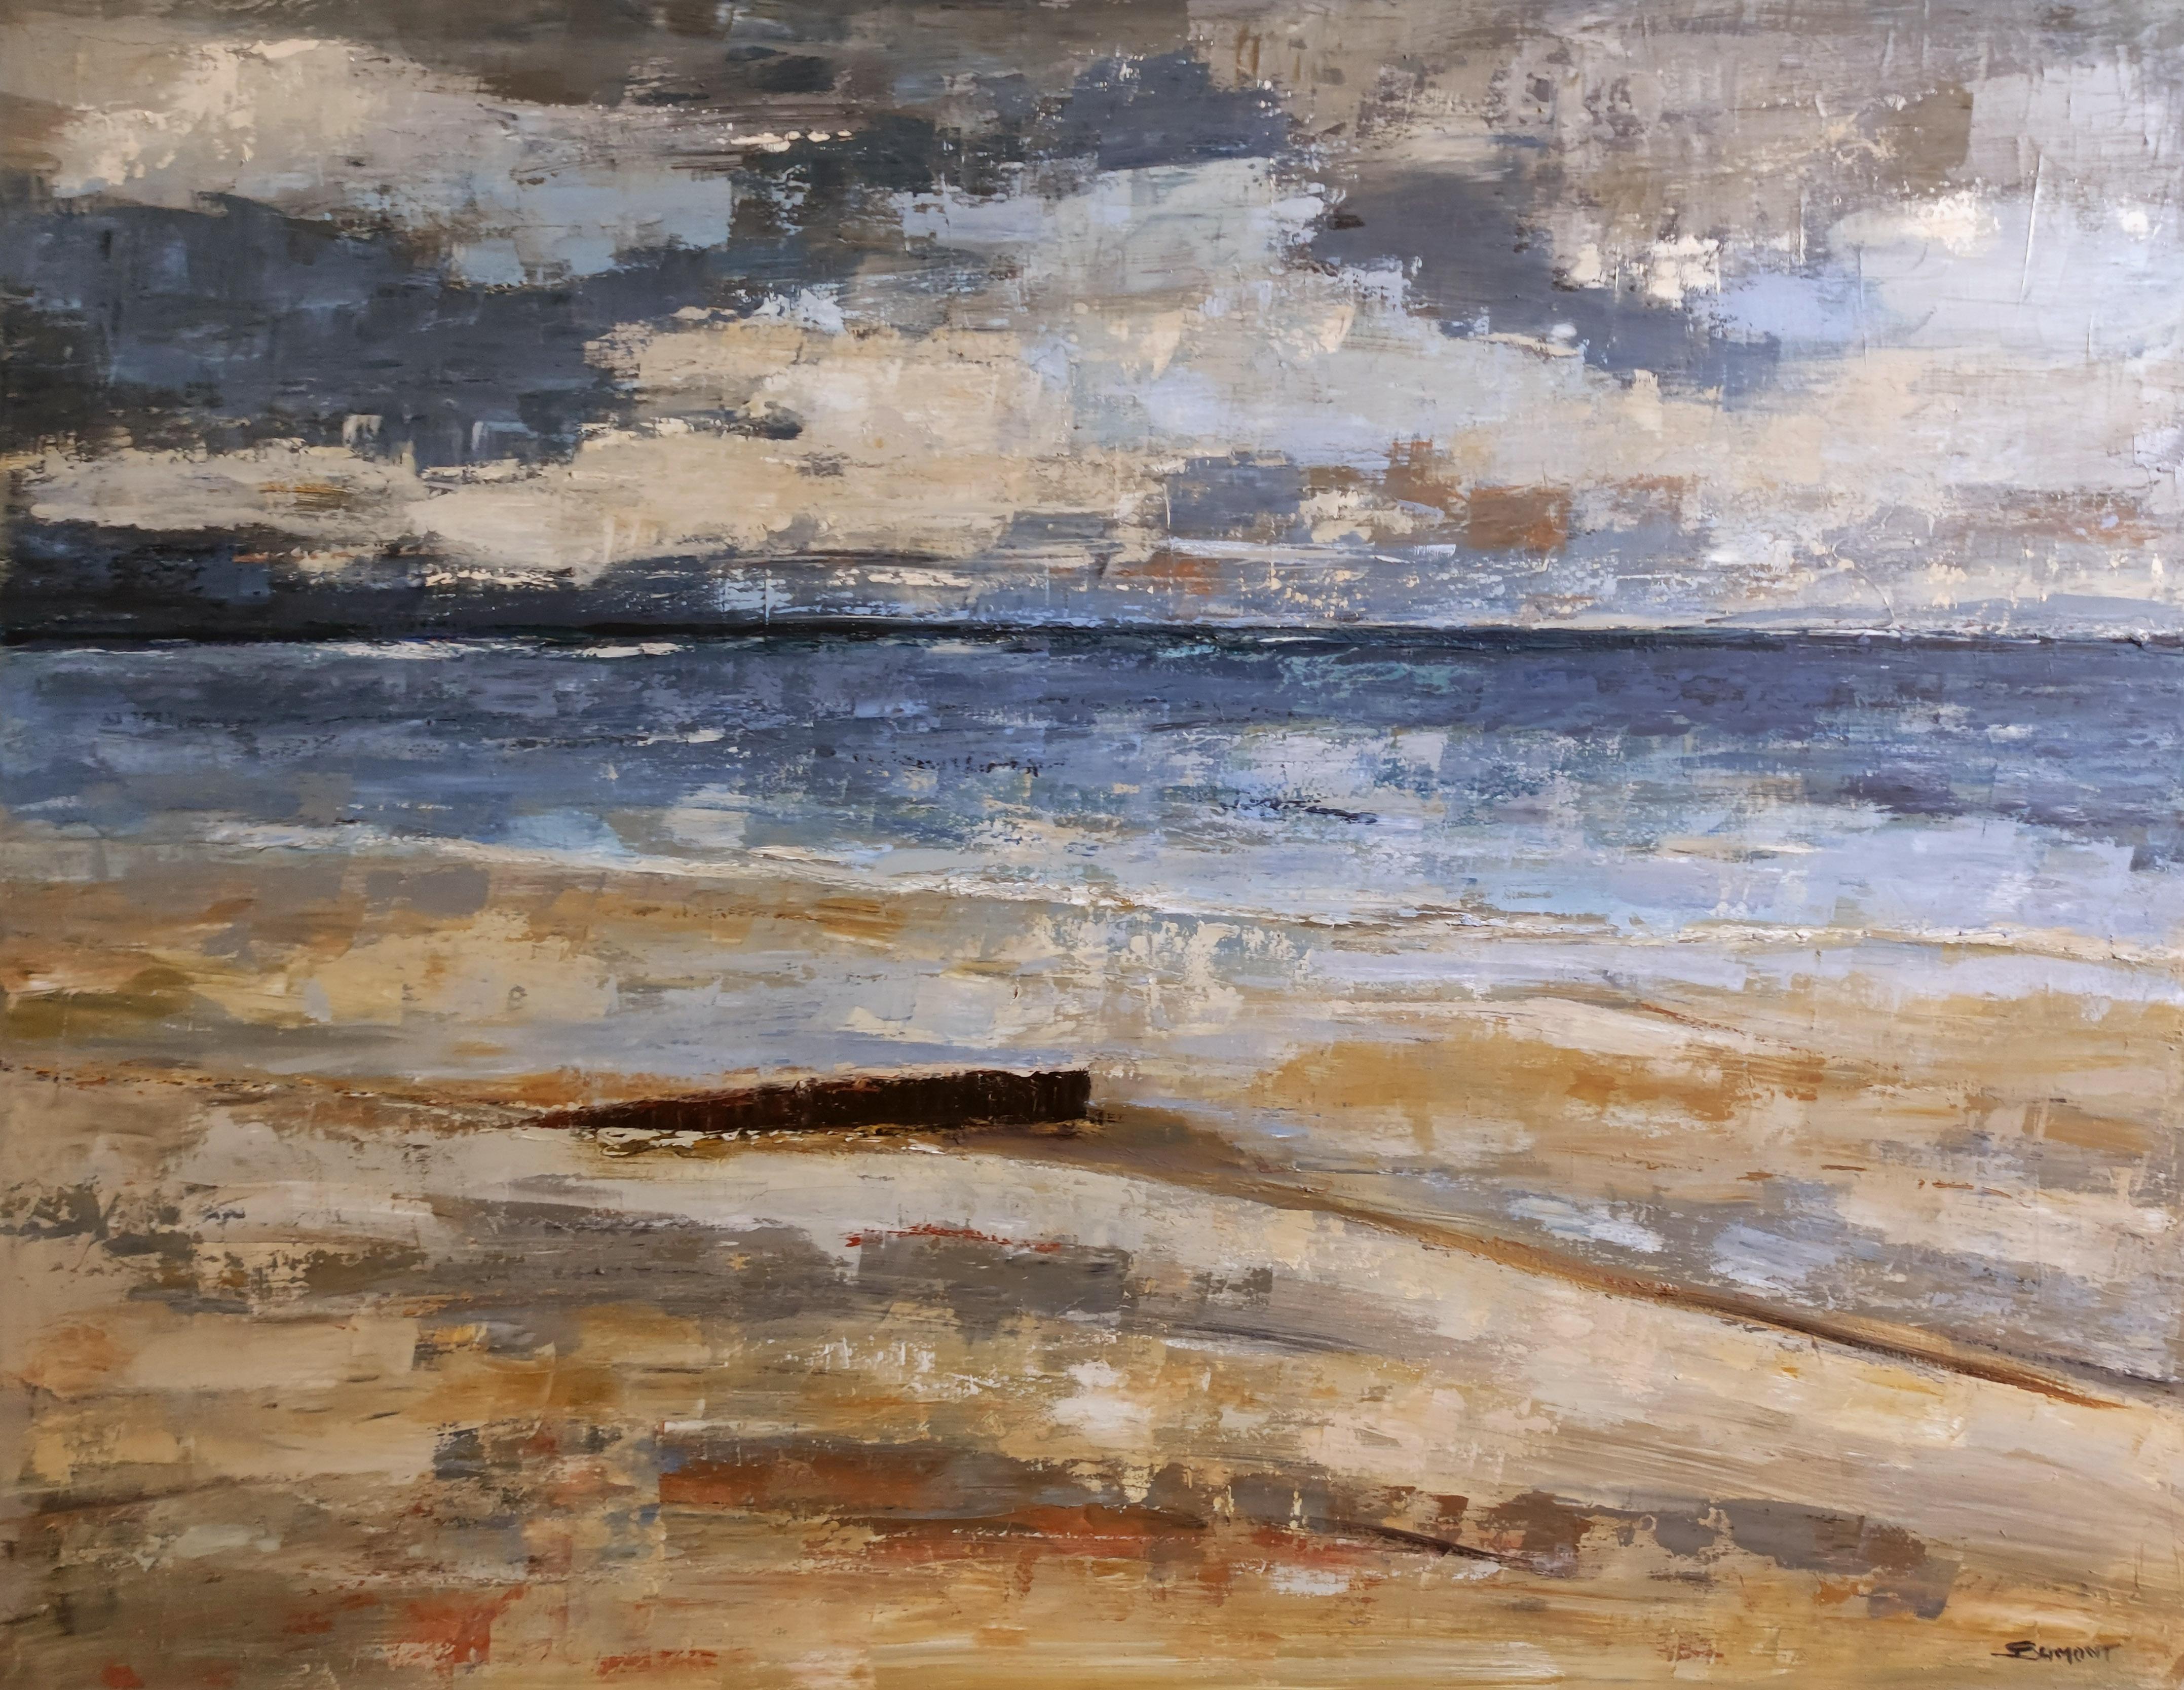 Beach, Seaside, Semi Abstract, Oil on canvas, texture, Sky, Contemporary? France - Painting by SOPHIE DUMONT